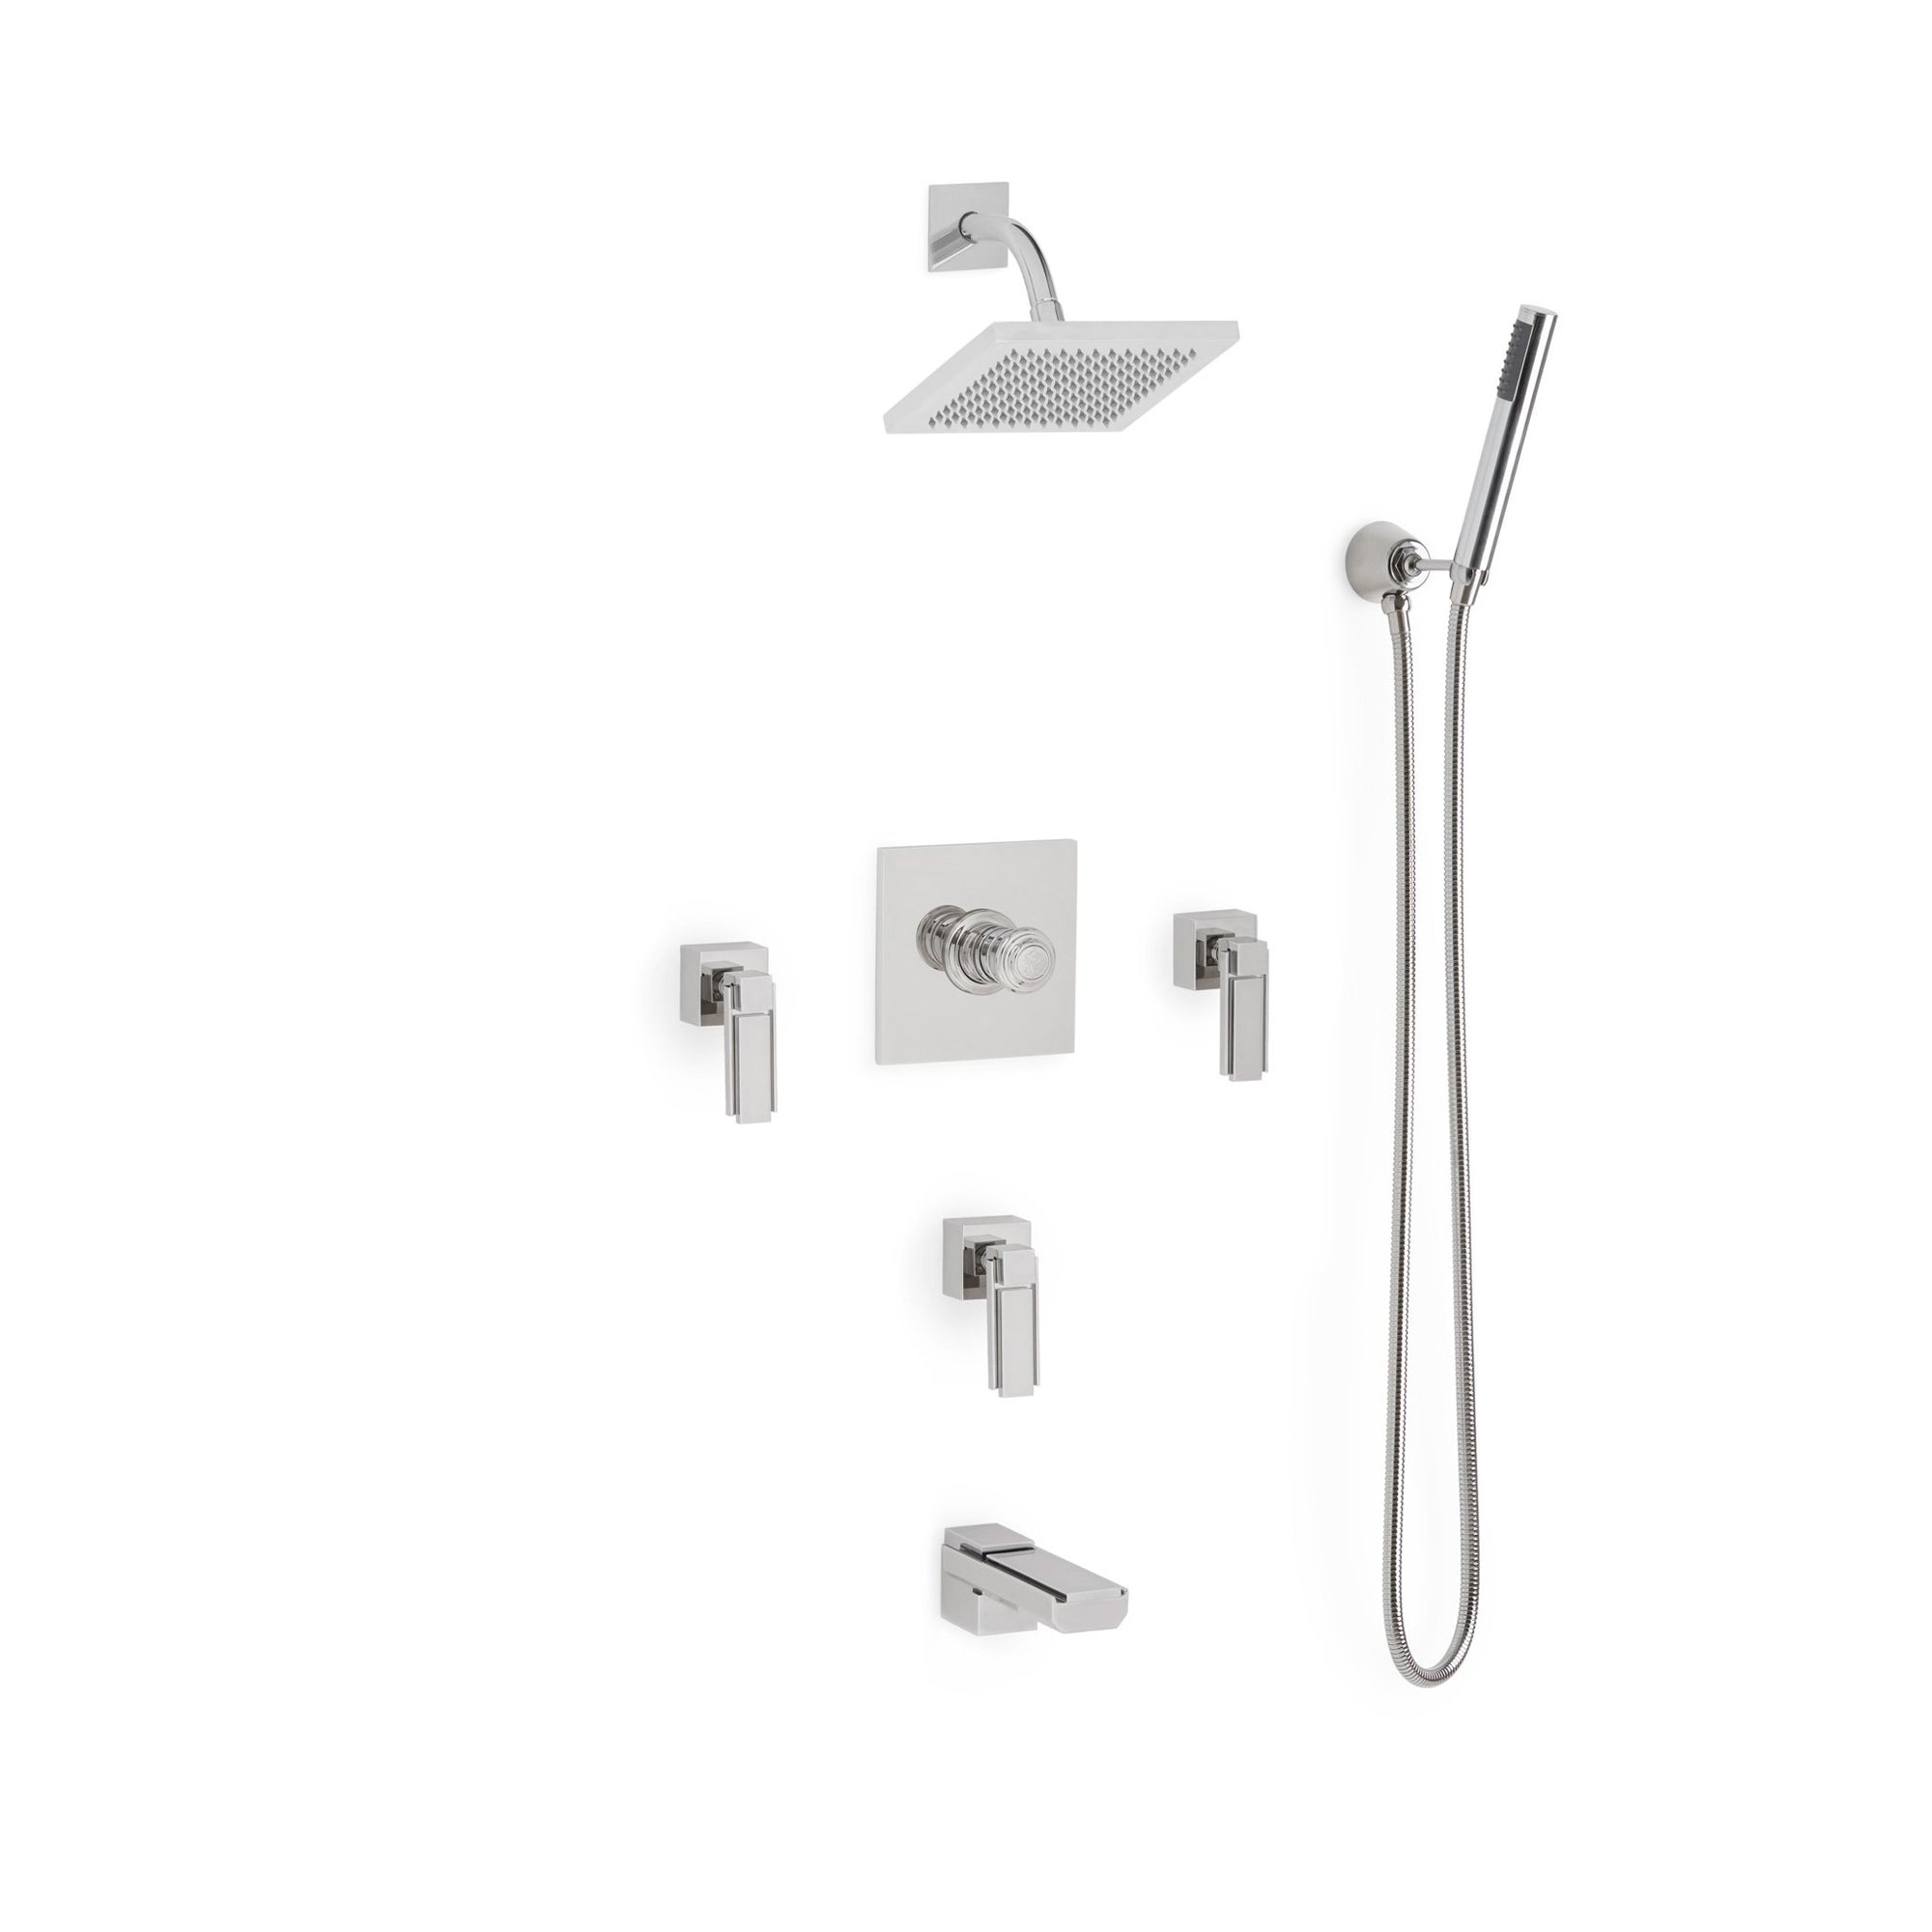 Sherle Wagner International Apollo High Flow Thermostatic Shower and Tub System in Polished Chrome metal finish